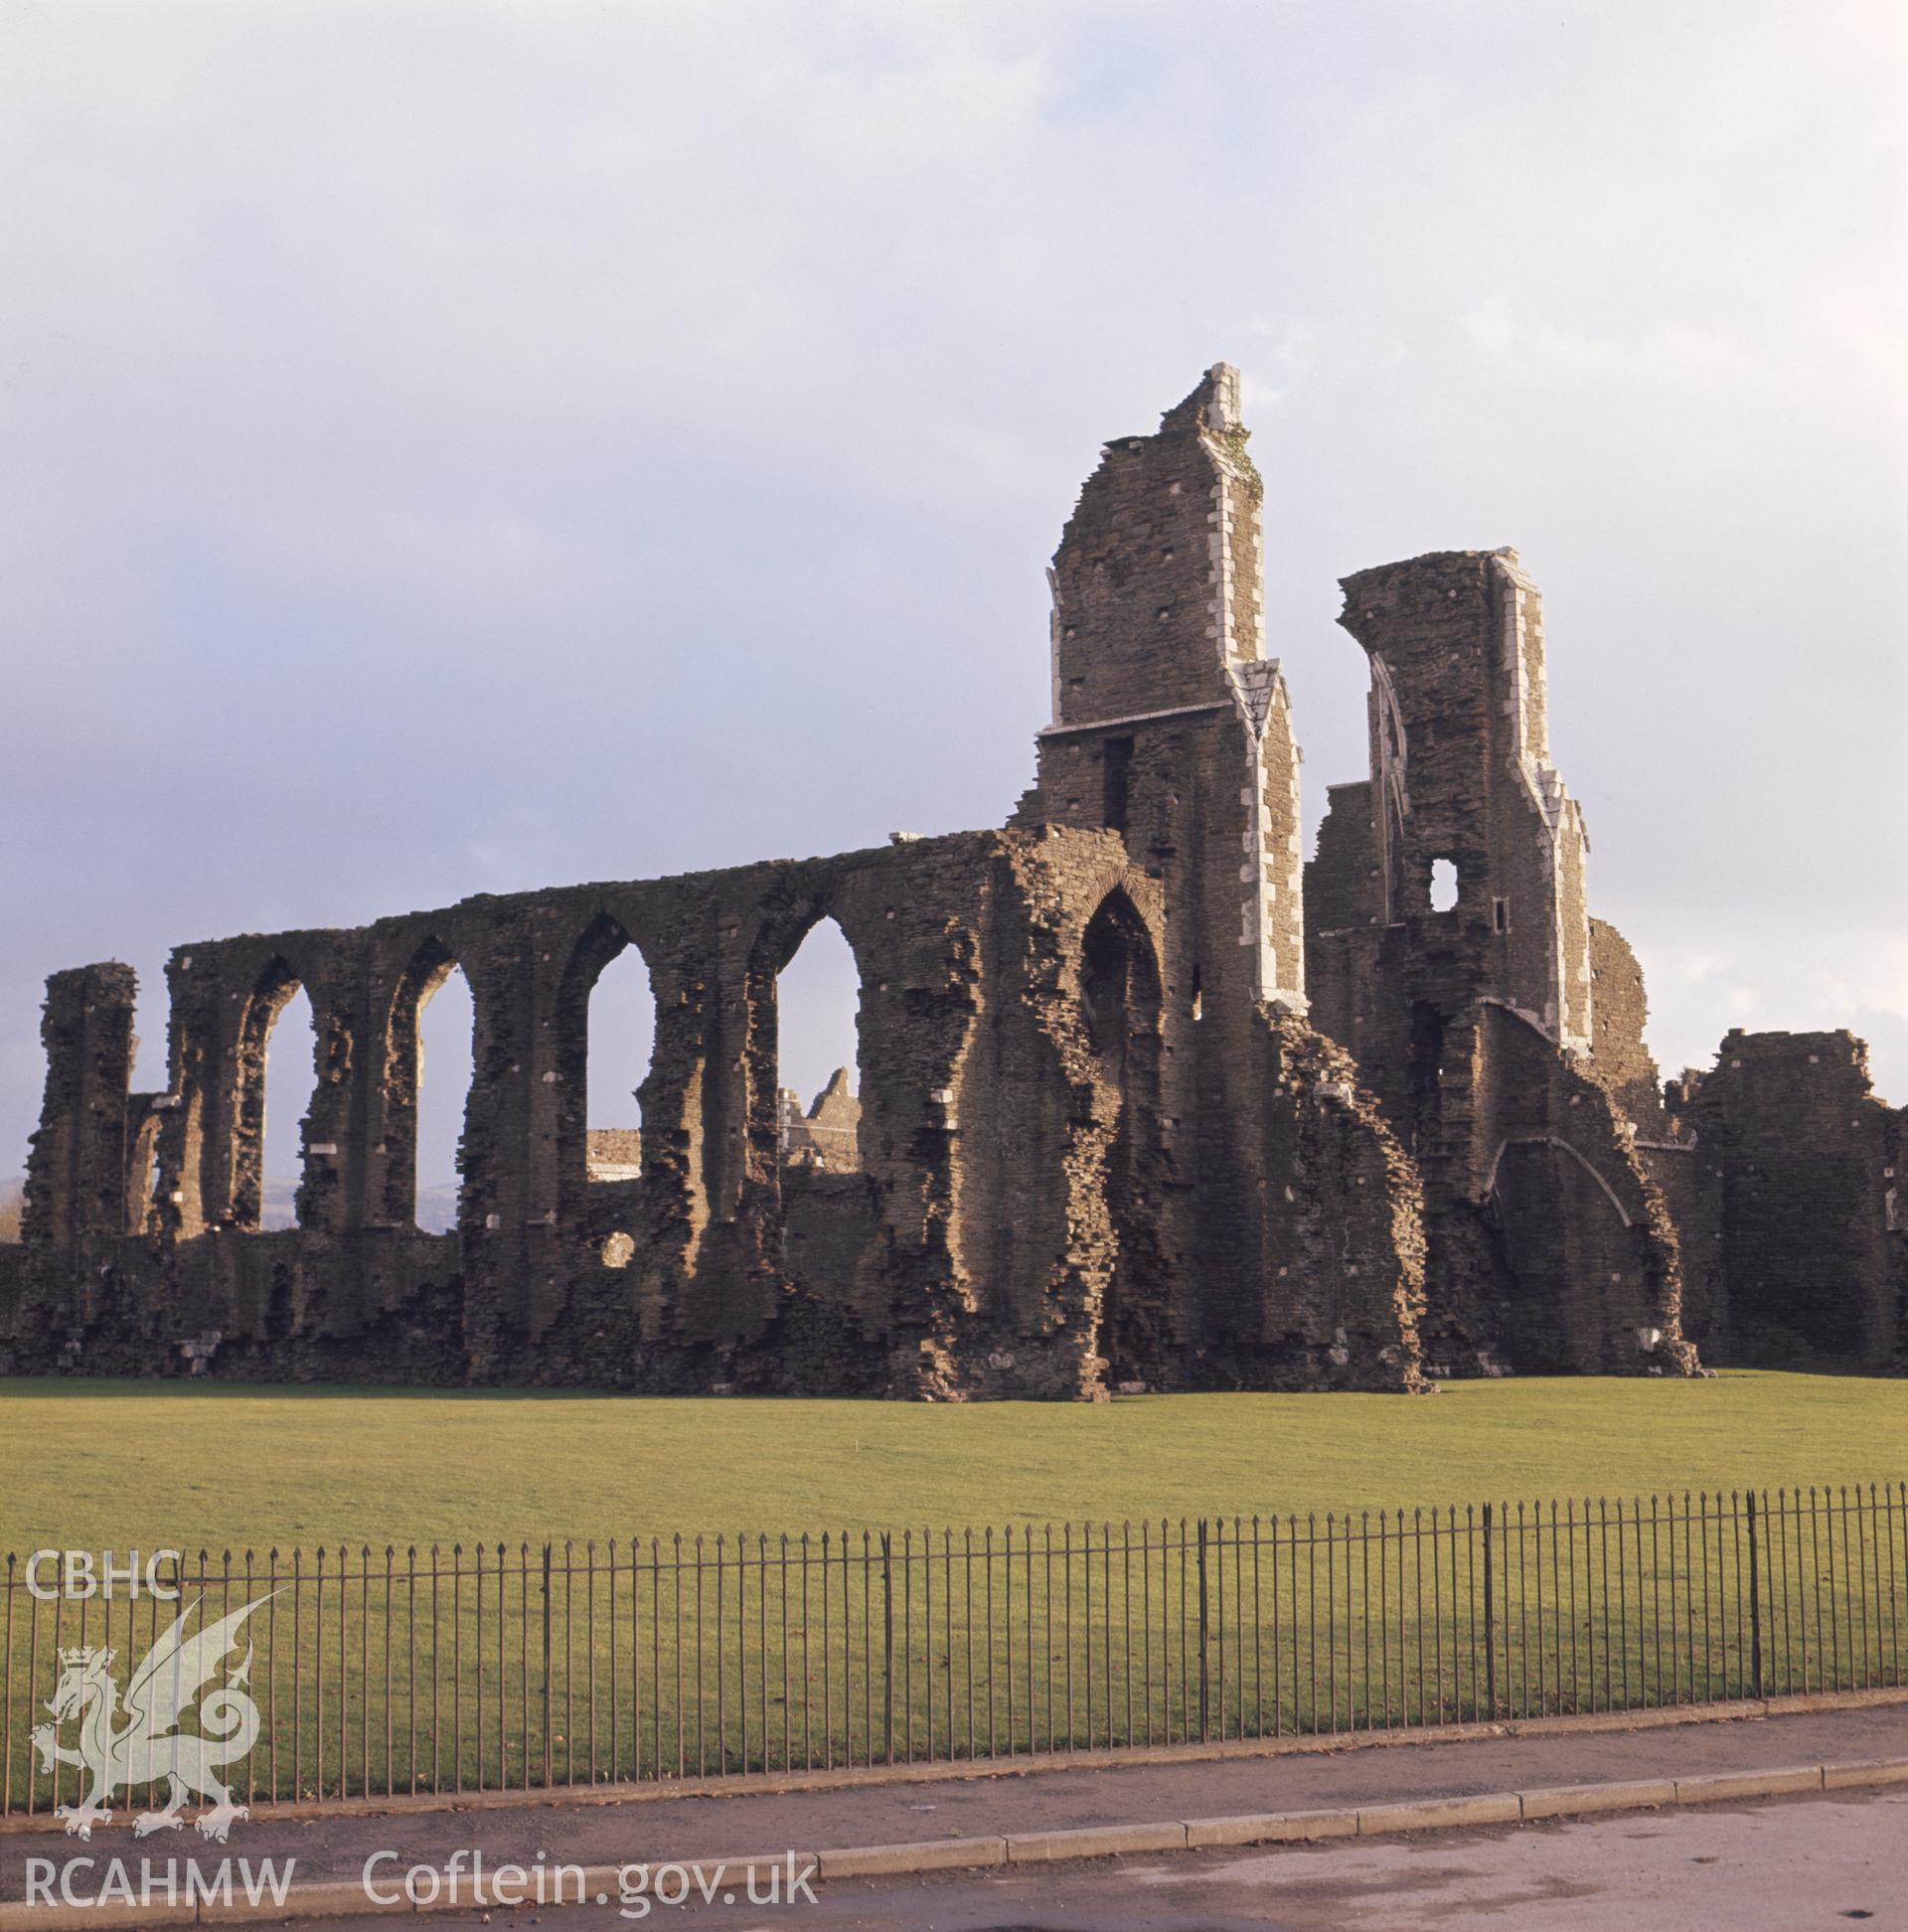 1 colour transparency showing view of Neath Abbey; collated by the former Central Office of Information.